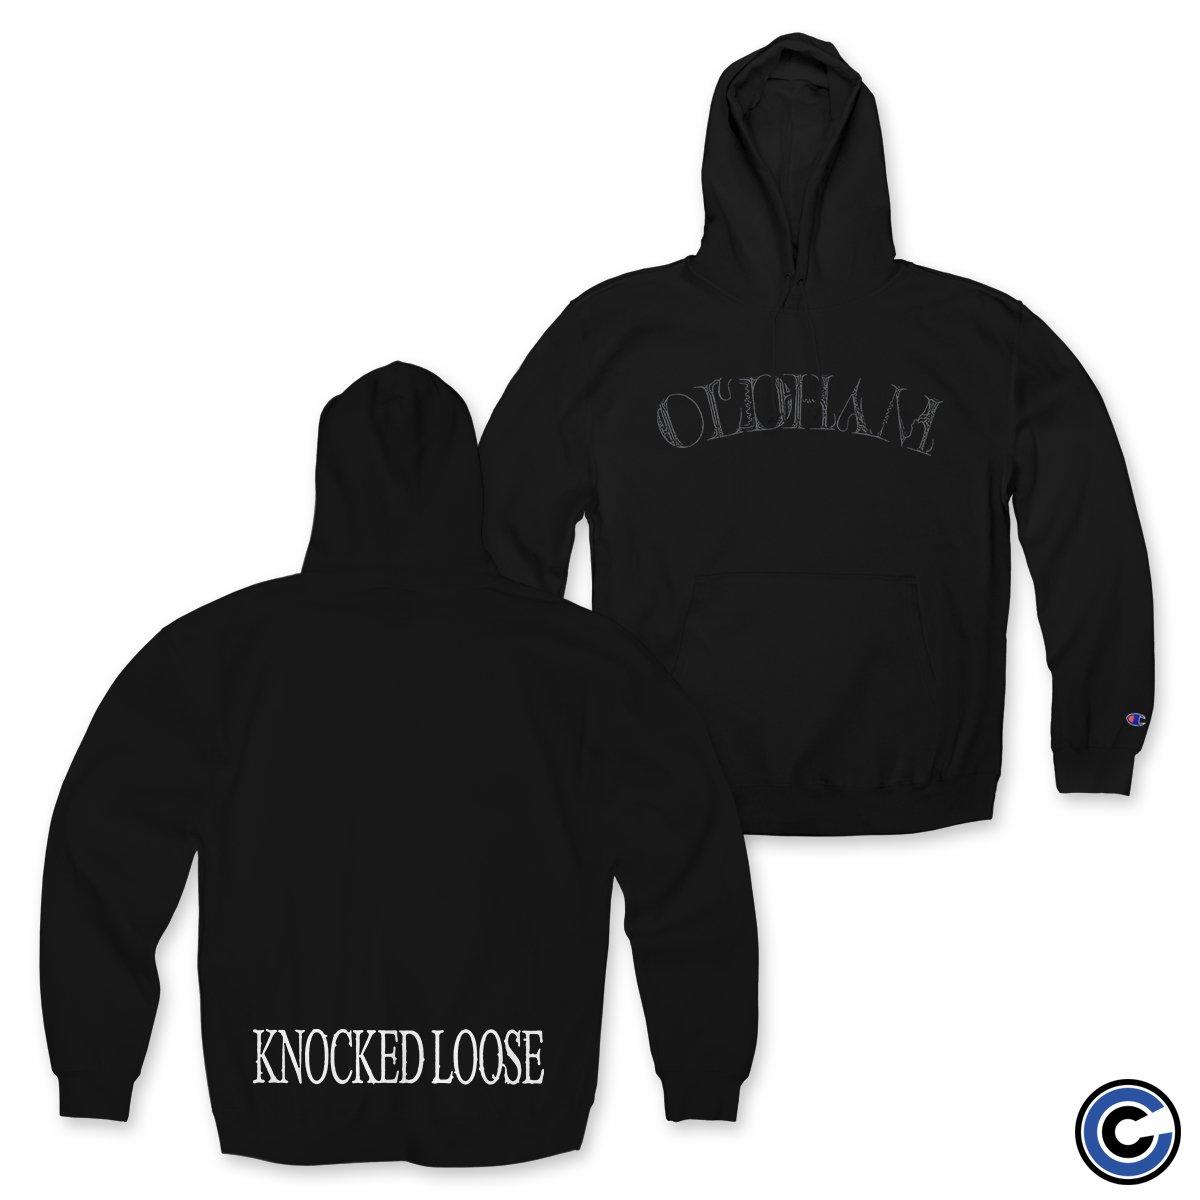 Buy – Knocked Loose "Bottom" Hoodie – Band & Music Merch – Cold Cuts Merch